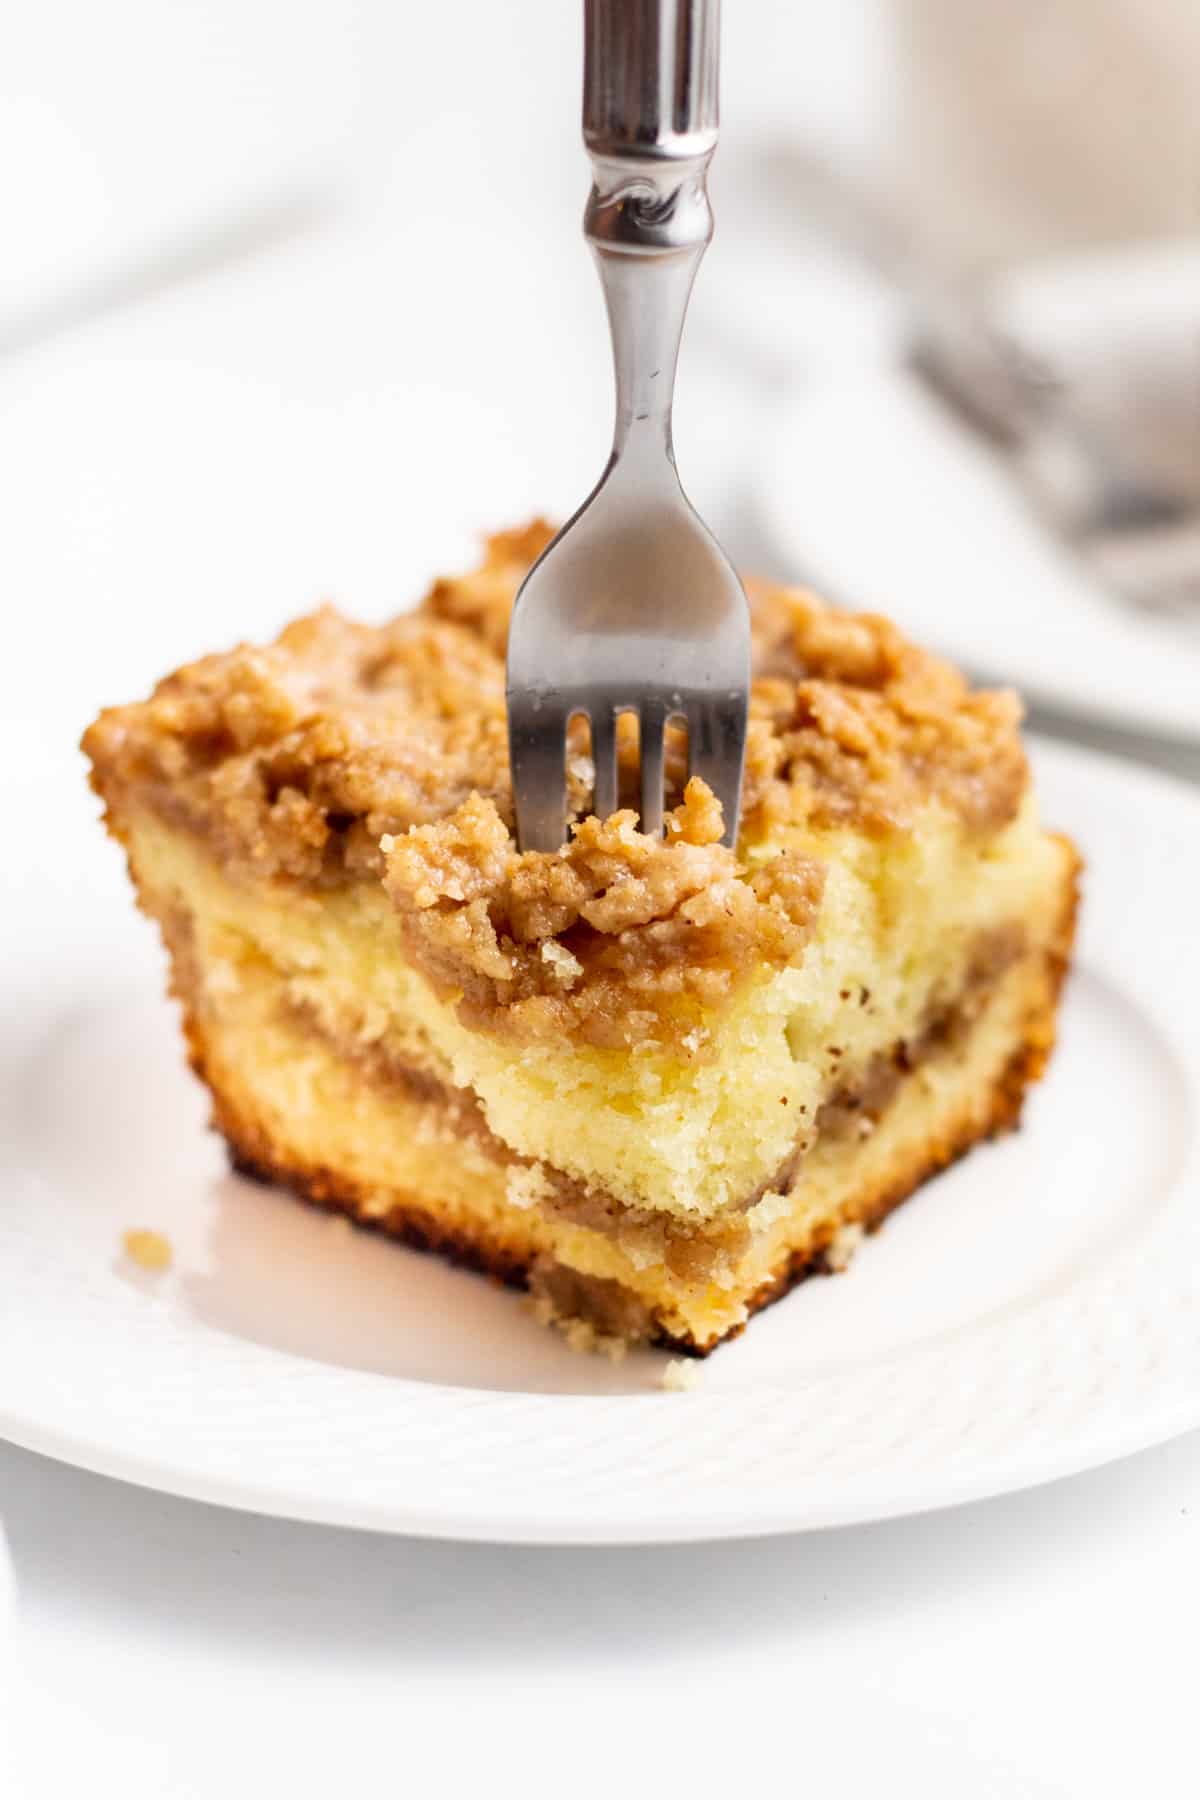 slice of sour cream cake mix coffee cake with a fork served on a plate